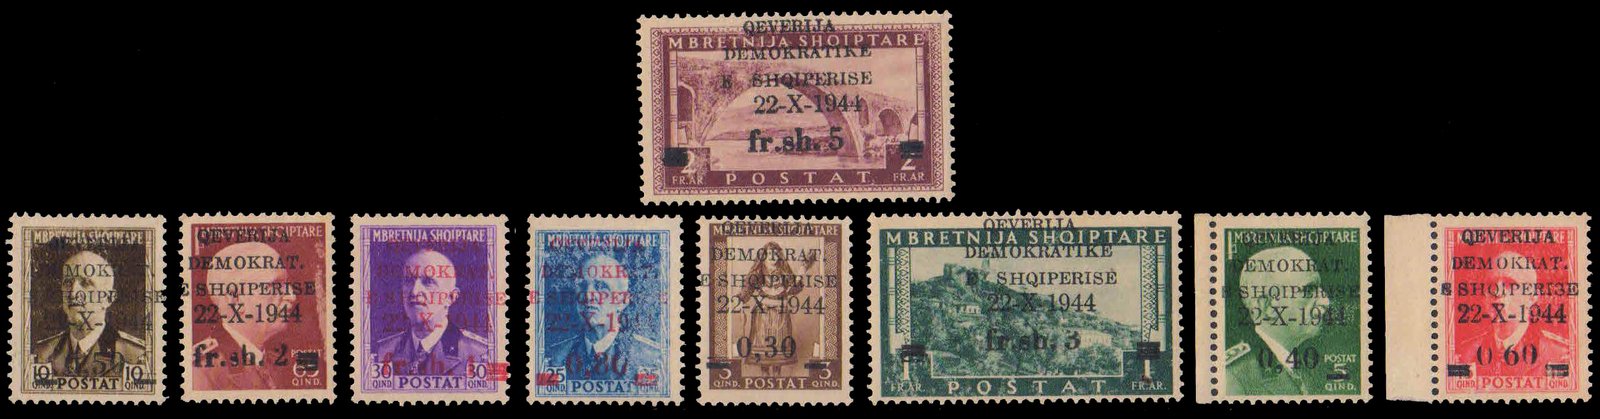 ALBANIA 1945, Surcharged Issue, King Victor Emmanuel, Set of 9, Mint G/W, S.G. 409-17, Cat £ 74.25